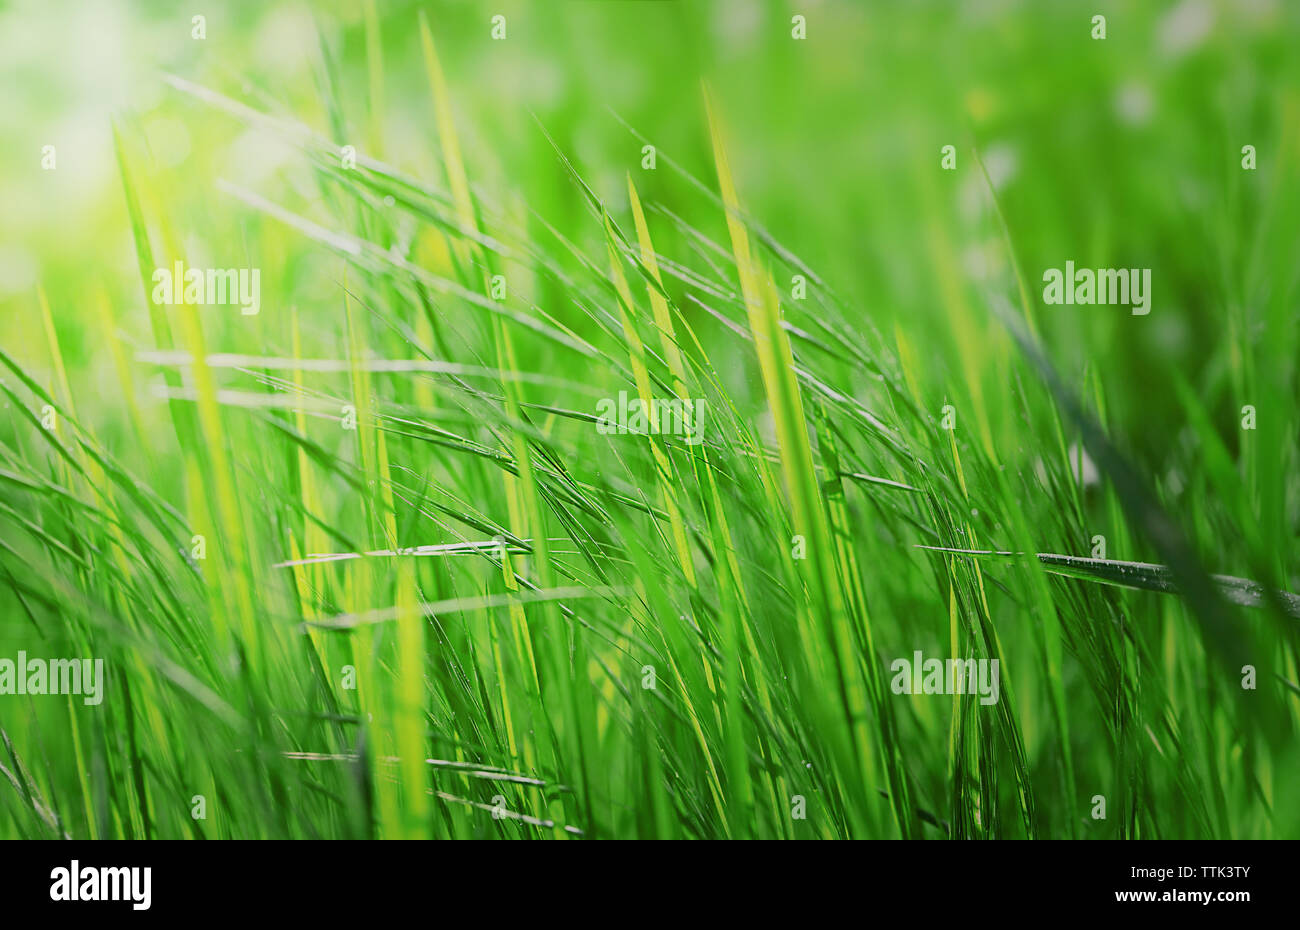 Variegated structures of grass Stock Photo - Alamy